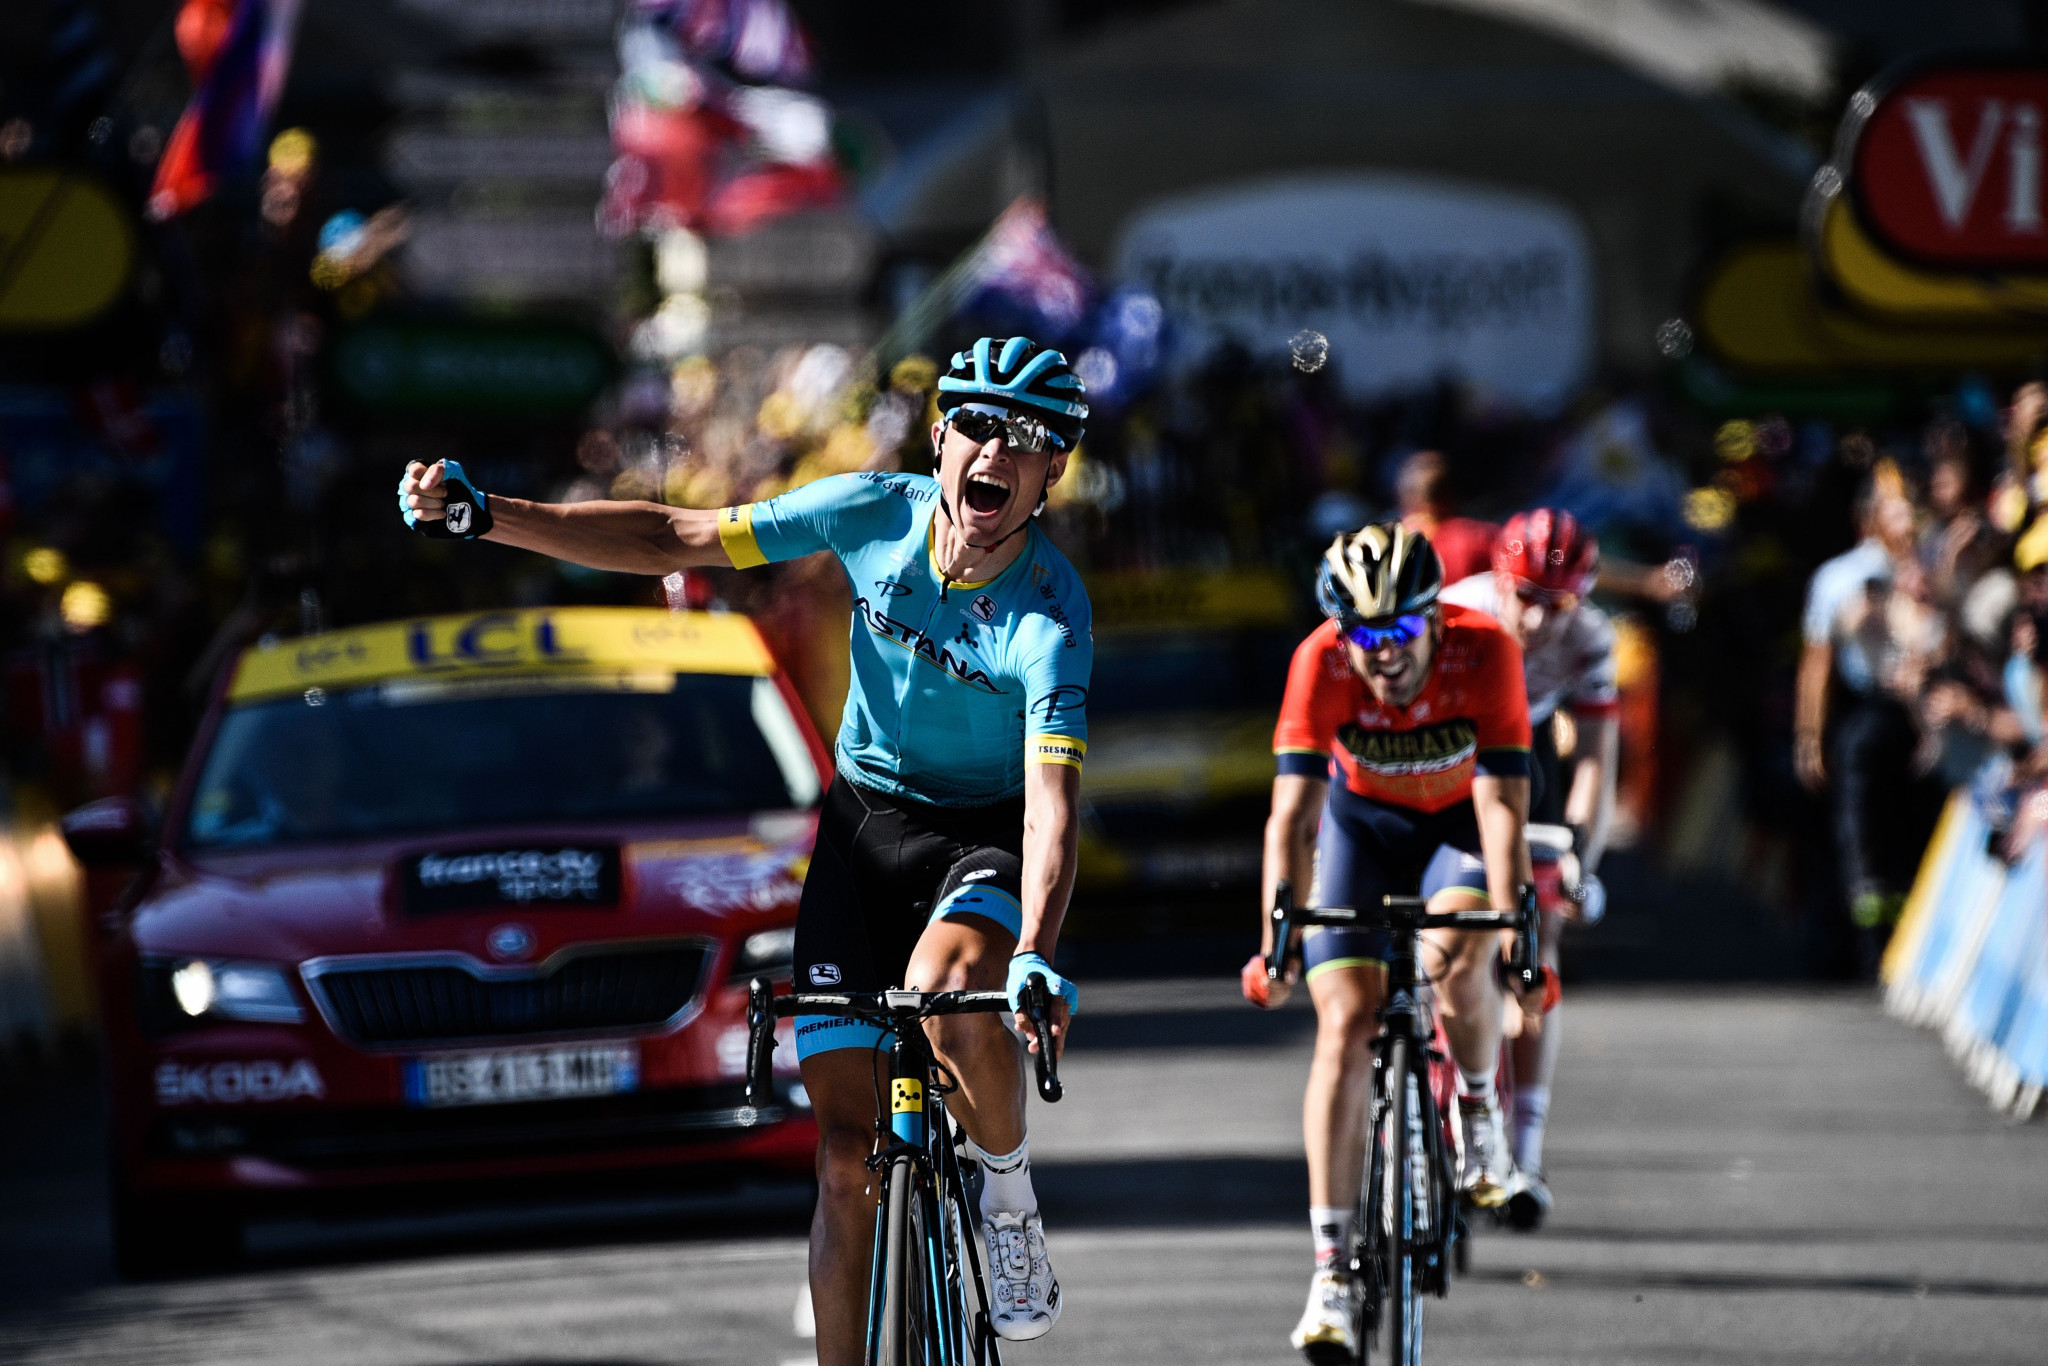 Cort clinches maiden Tour de France stage win in Carcassonne